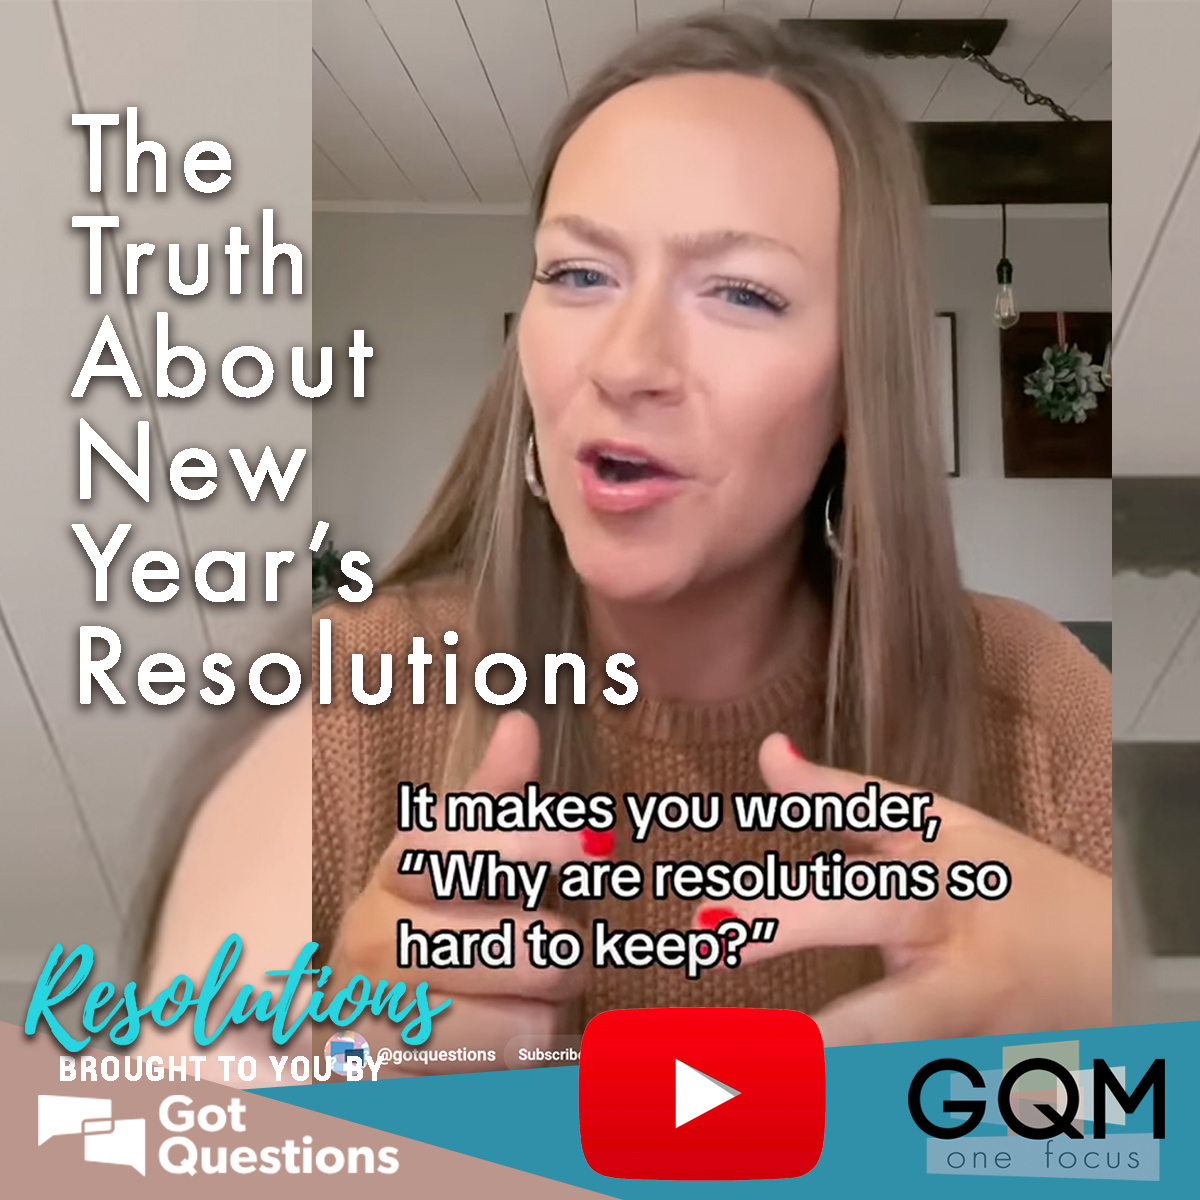 The Truth About New Year's Resolutions